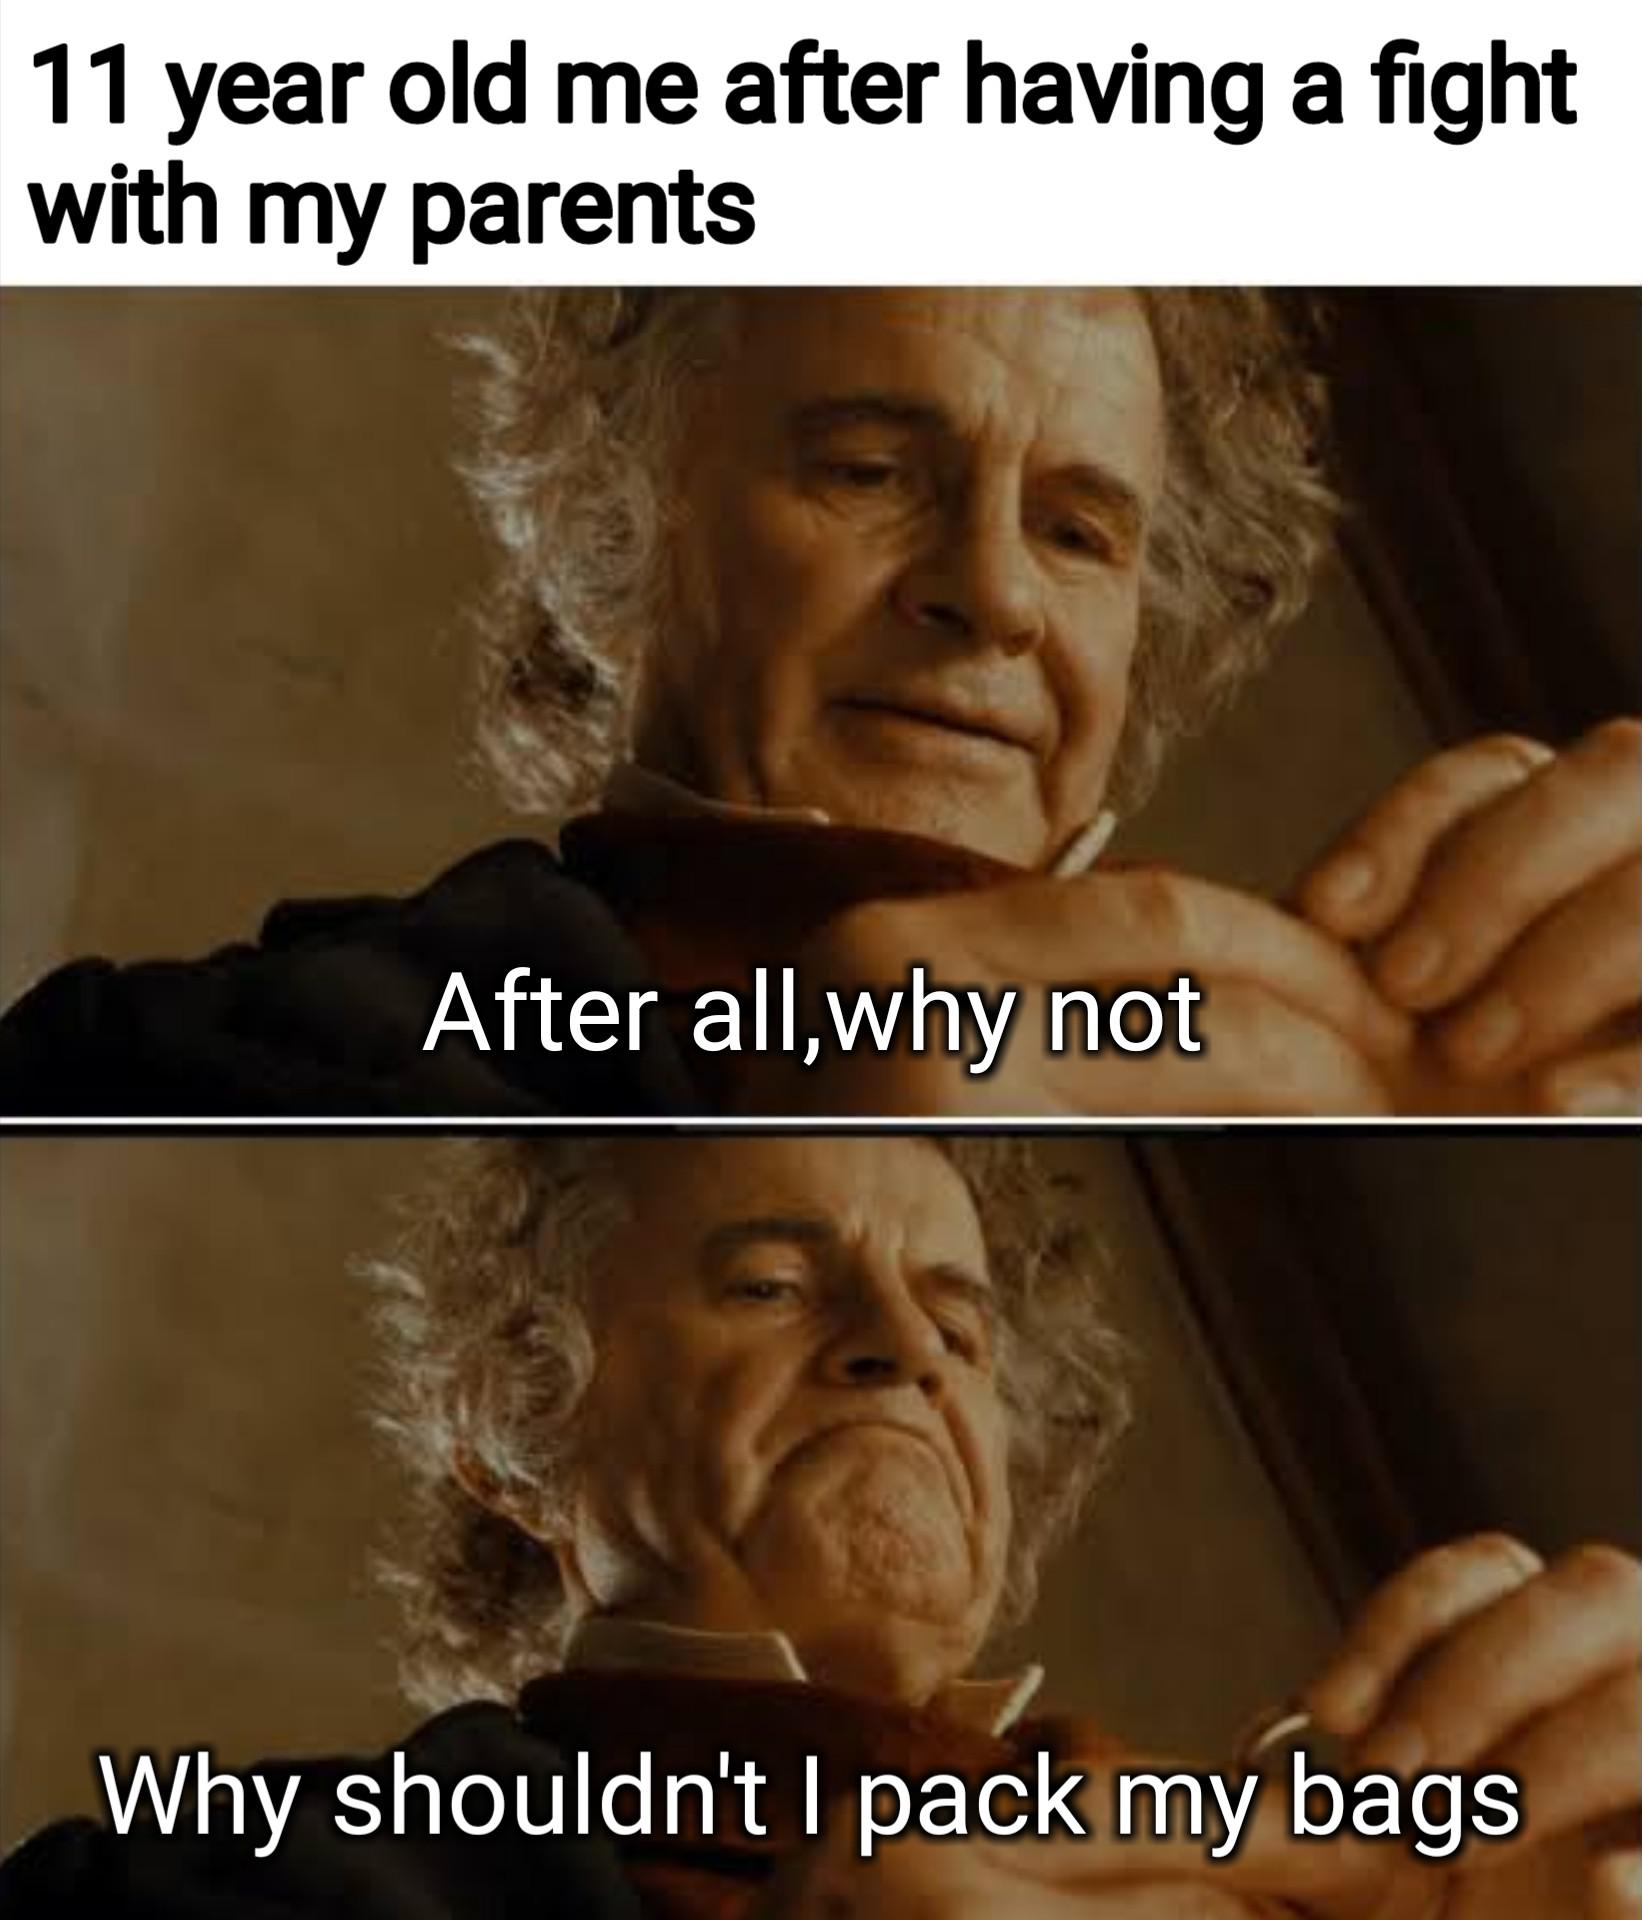 bilbo baggins after all why not meme - suez memes - 11 year old me after having a fight with my parents After all,why not Why shouldn't I pack my bags